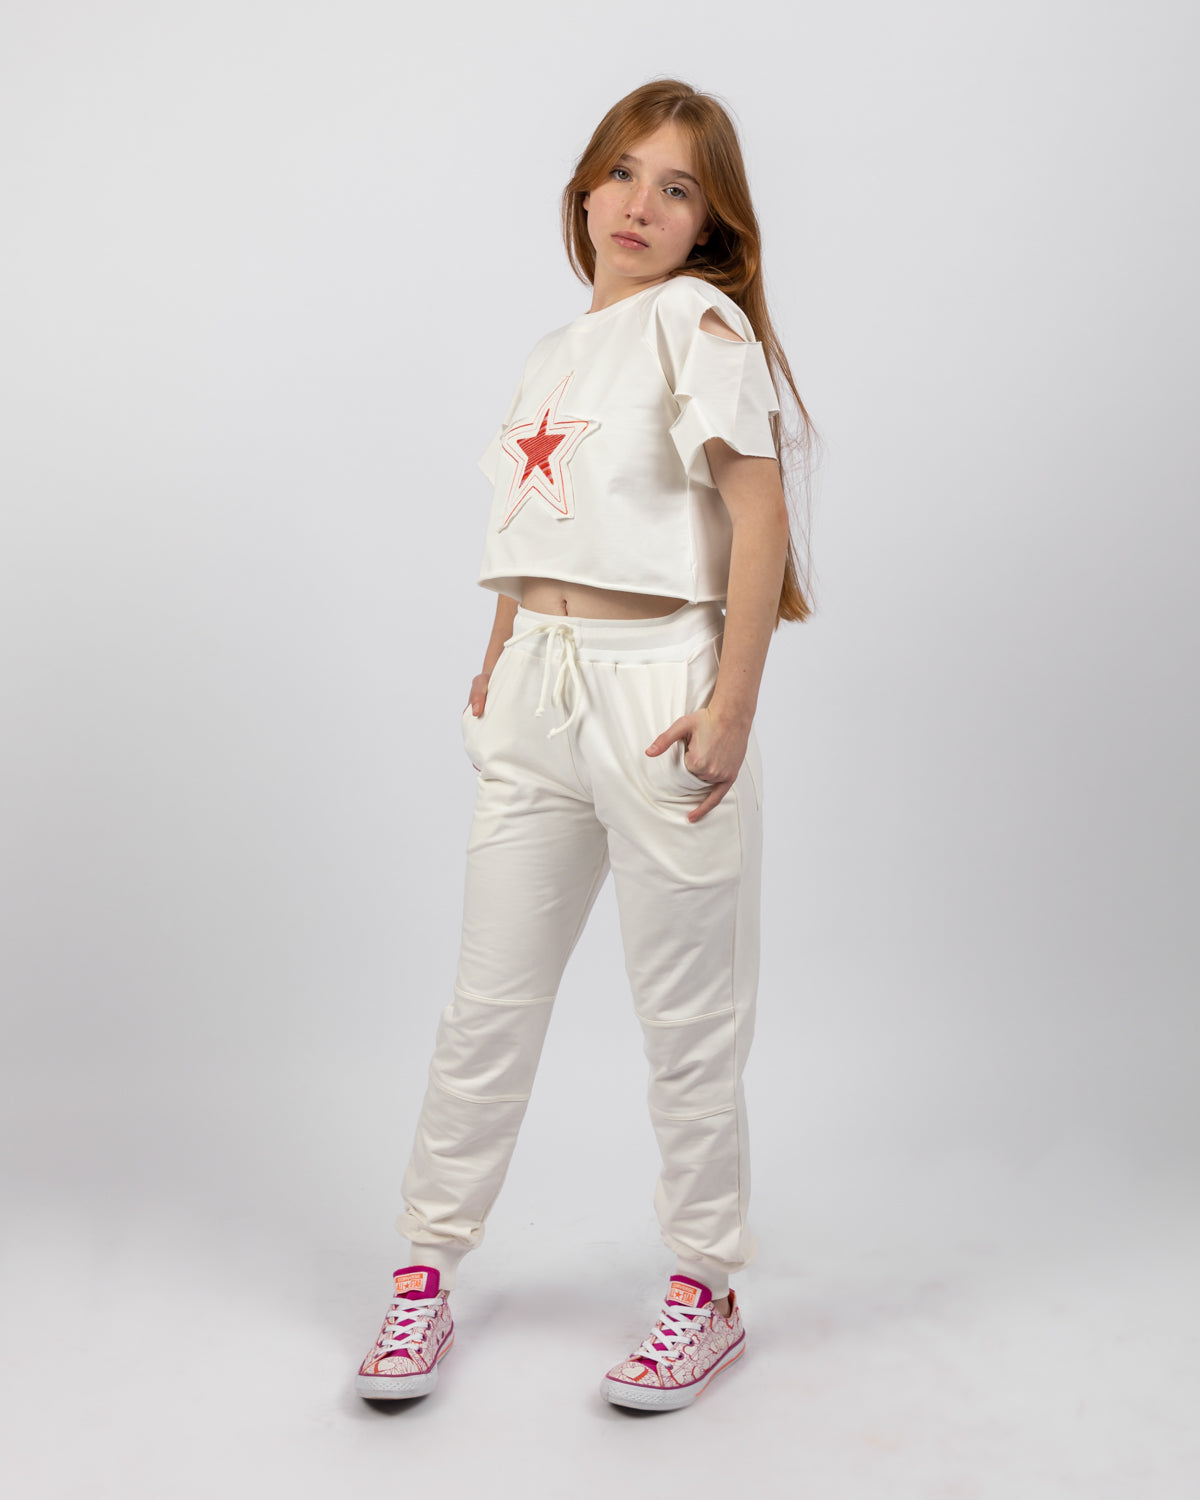 Star Embroidered Cropped Sweatshirt For Girls - White